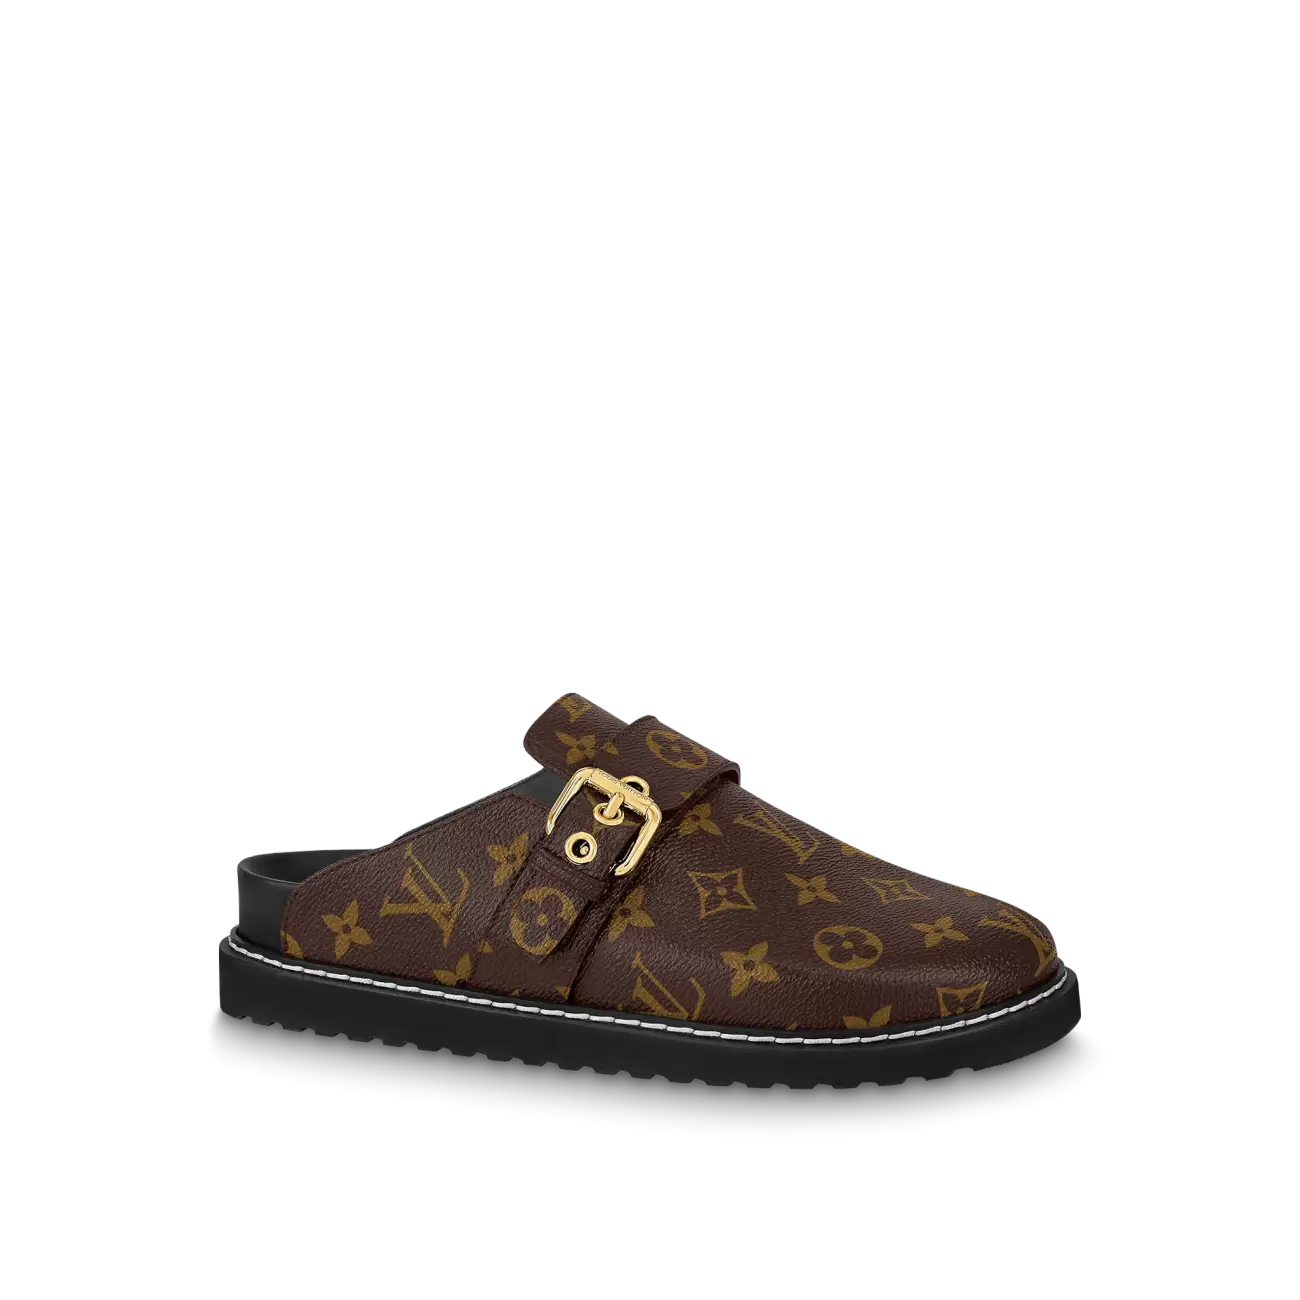 LV Cozy Flat Comfort Clog cacao brown